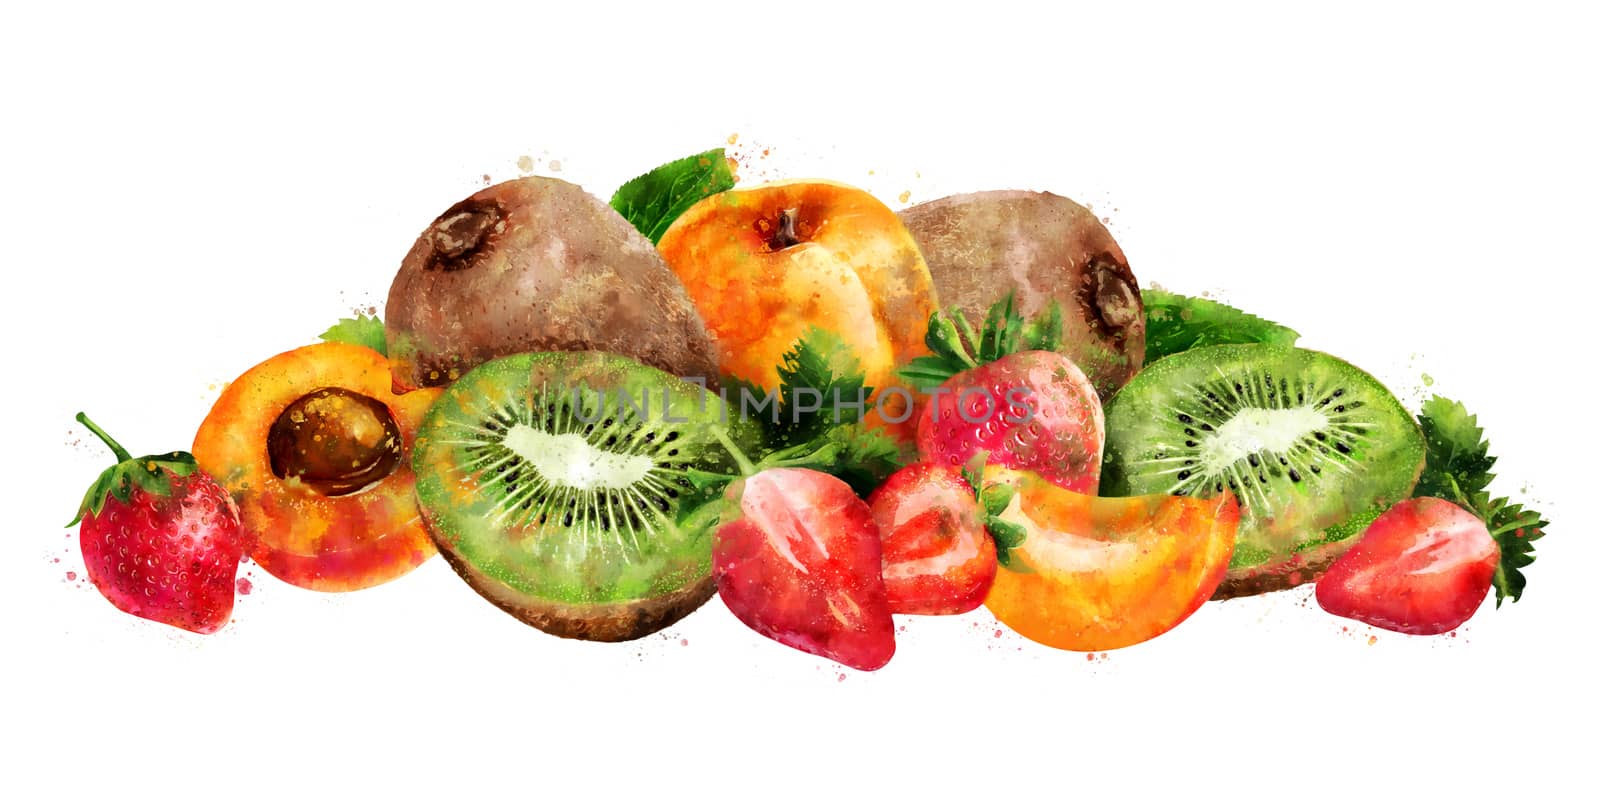 Apricot, strawberry and kiwi on white background. Watercolor illustration by ConceptCafe